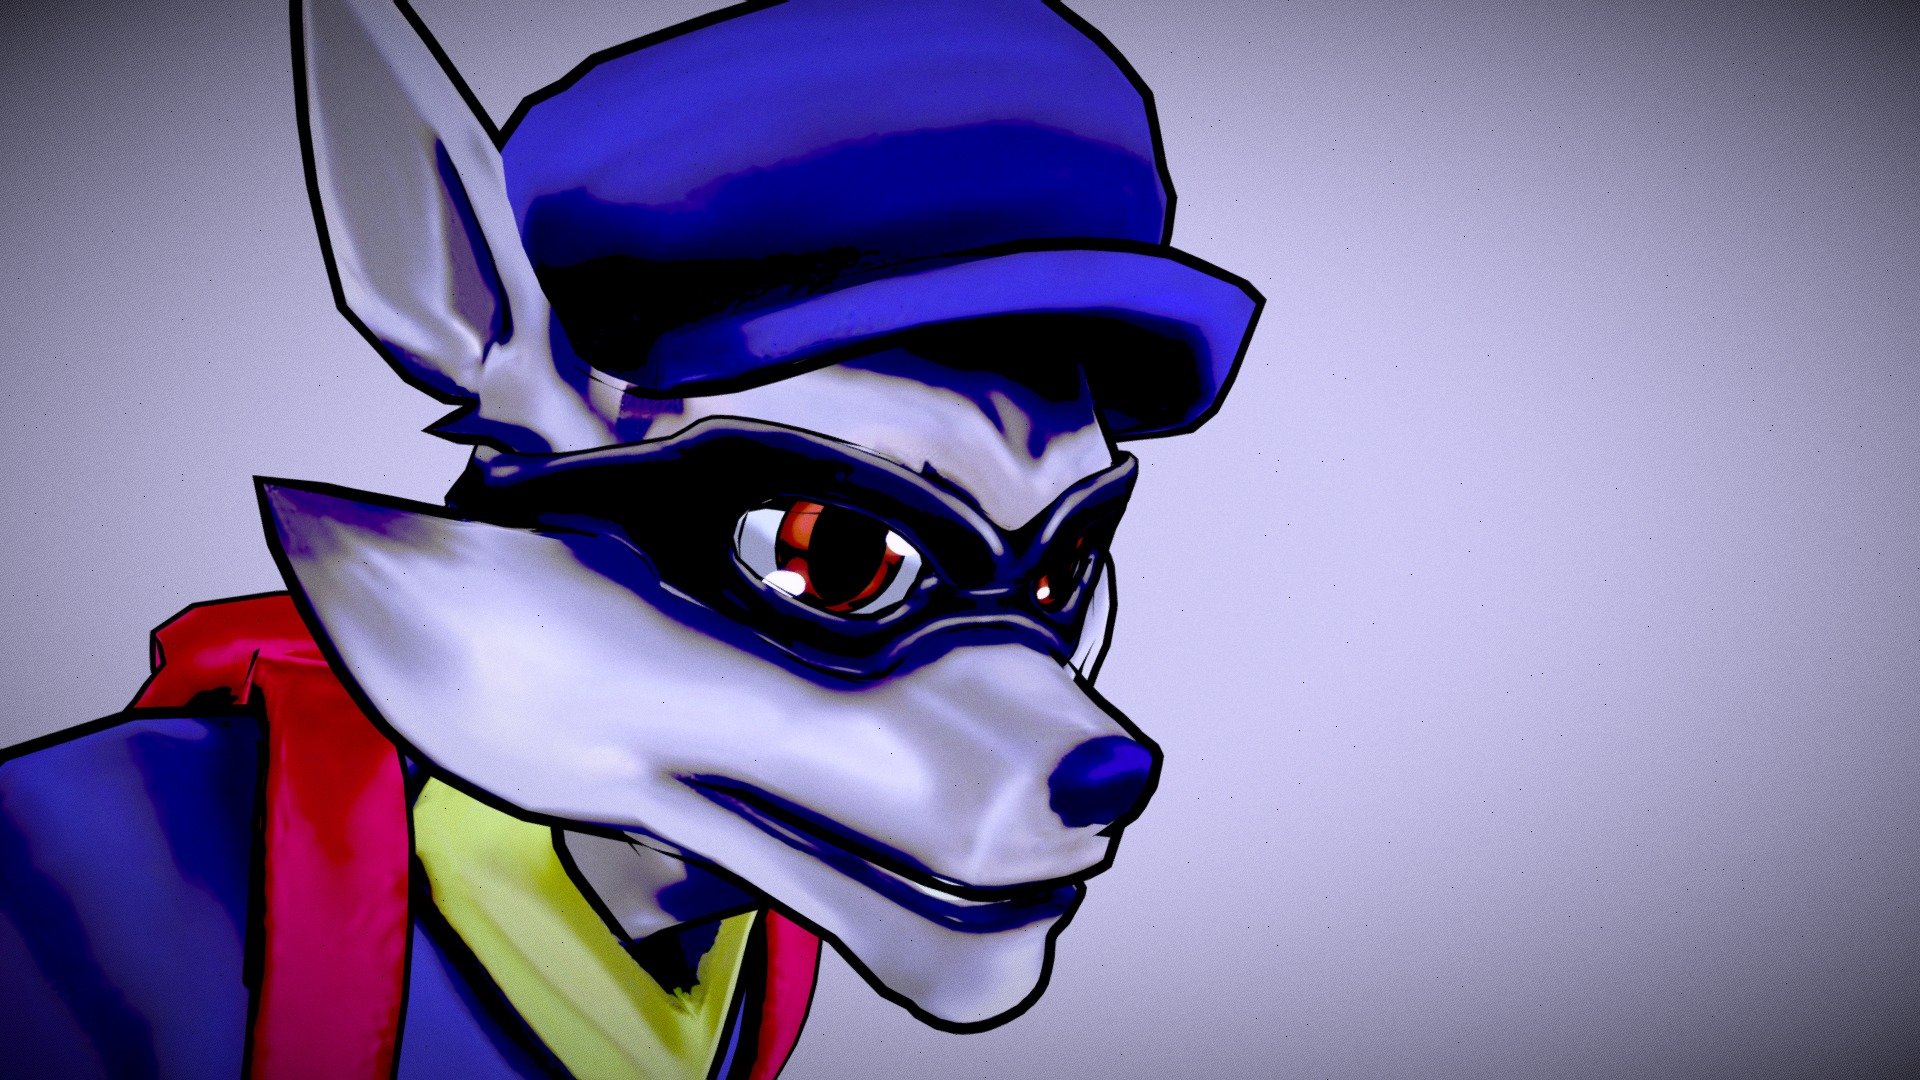 Sly Cooper 3 on Behance